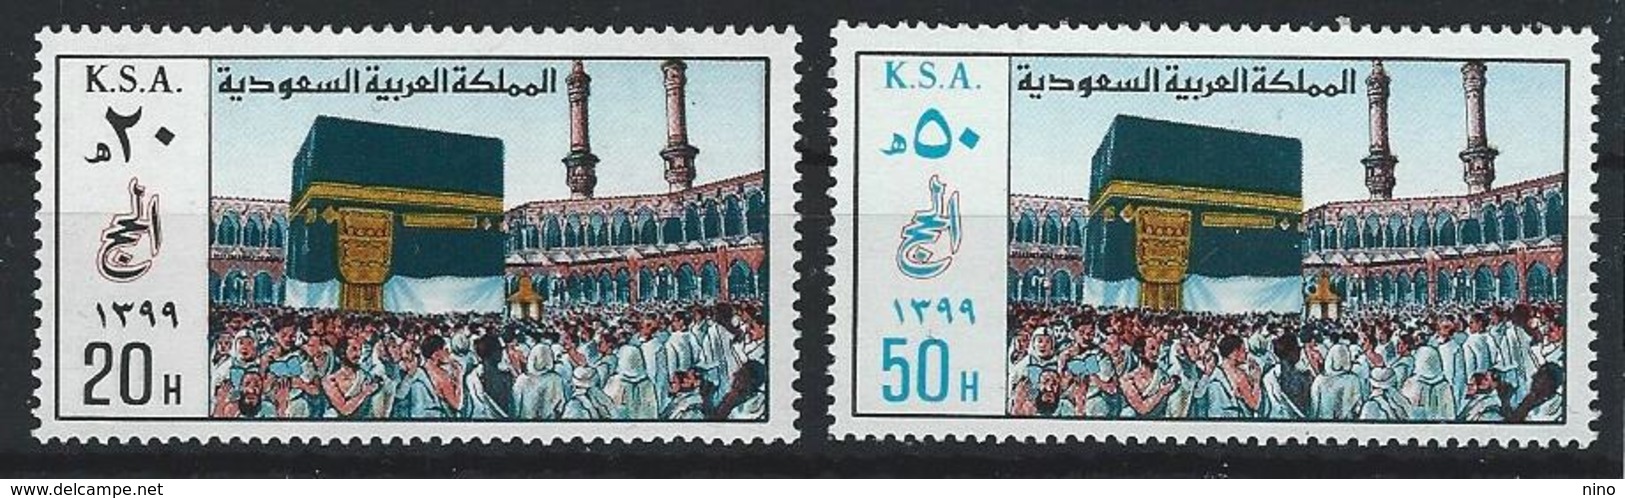 Saudi Arabia. Scott # 784-85 MNH. Piligrimage To Mecca. Joint Issue With Iraq 1979 - Emissions Communes